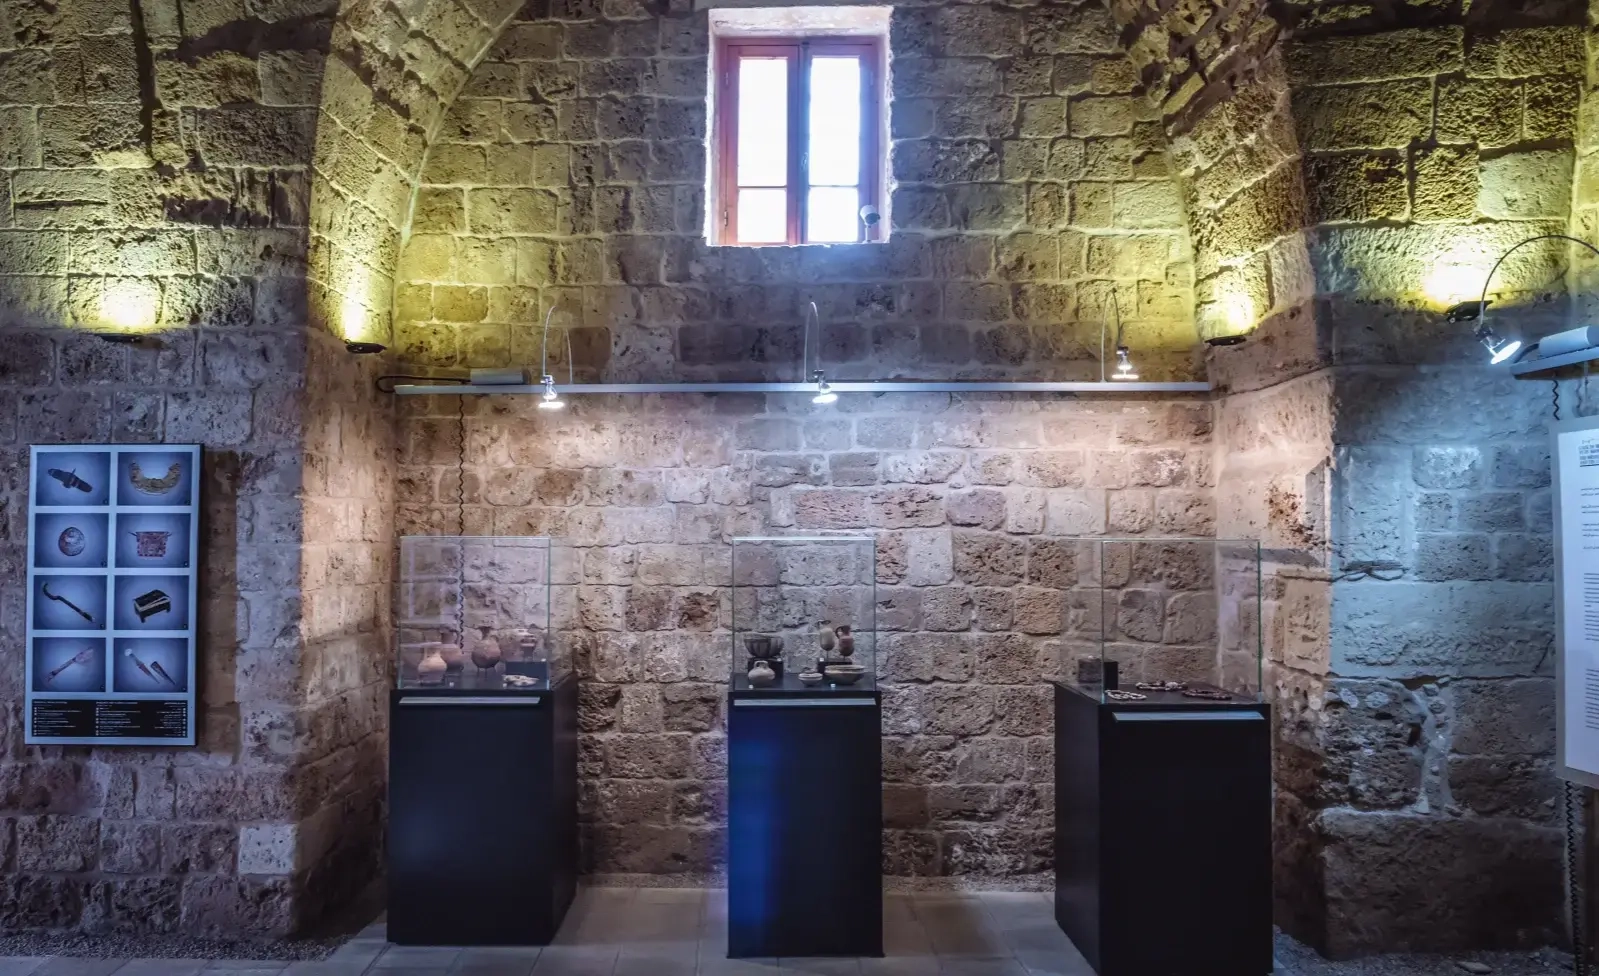 Museum of the Archaeological Site of Byblos